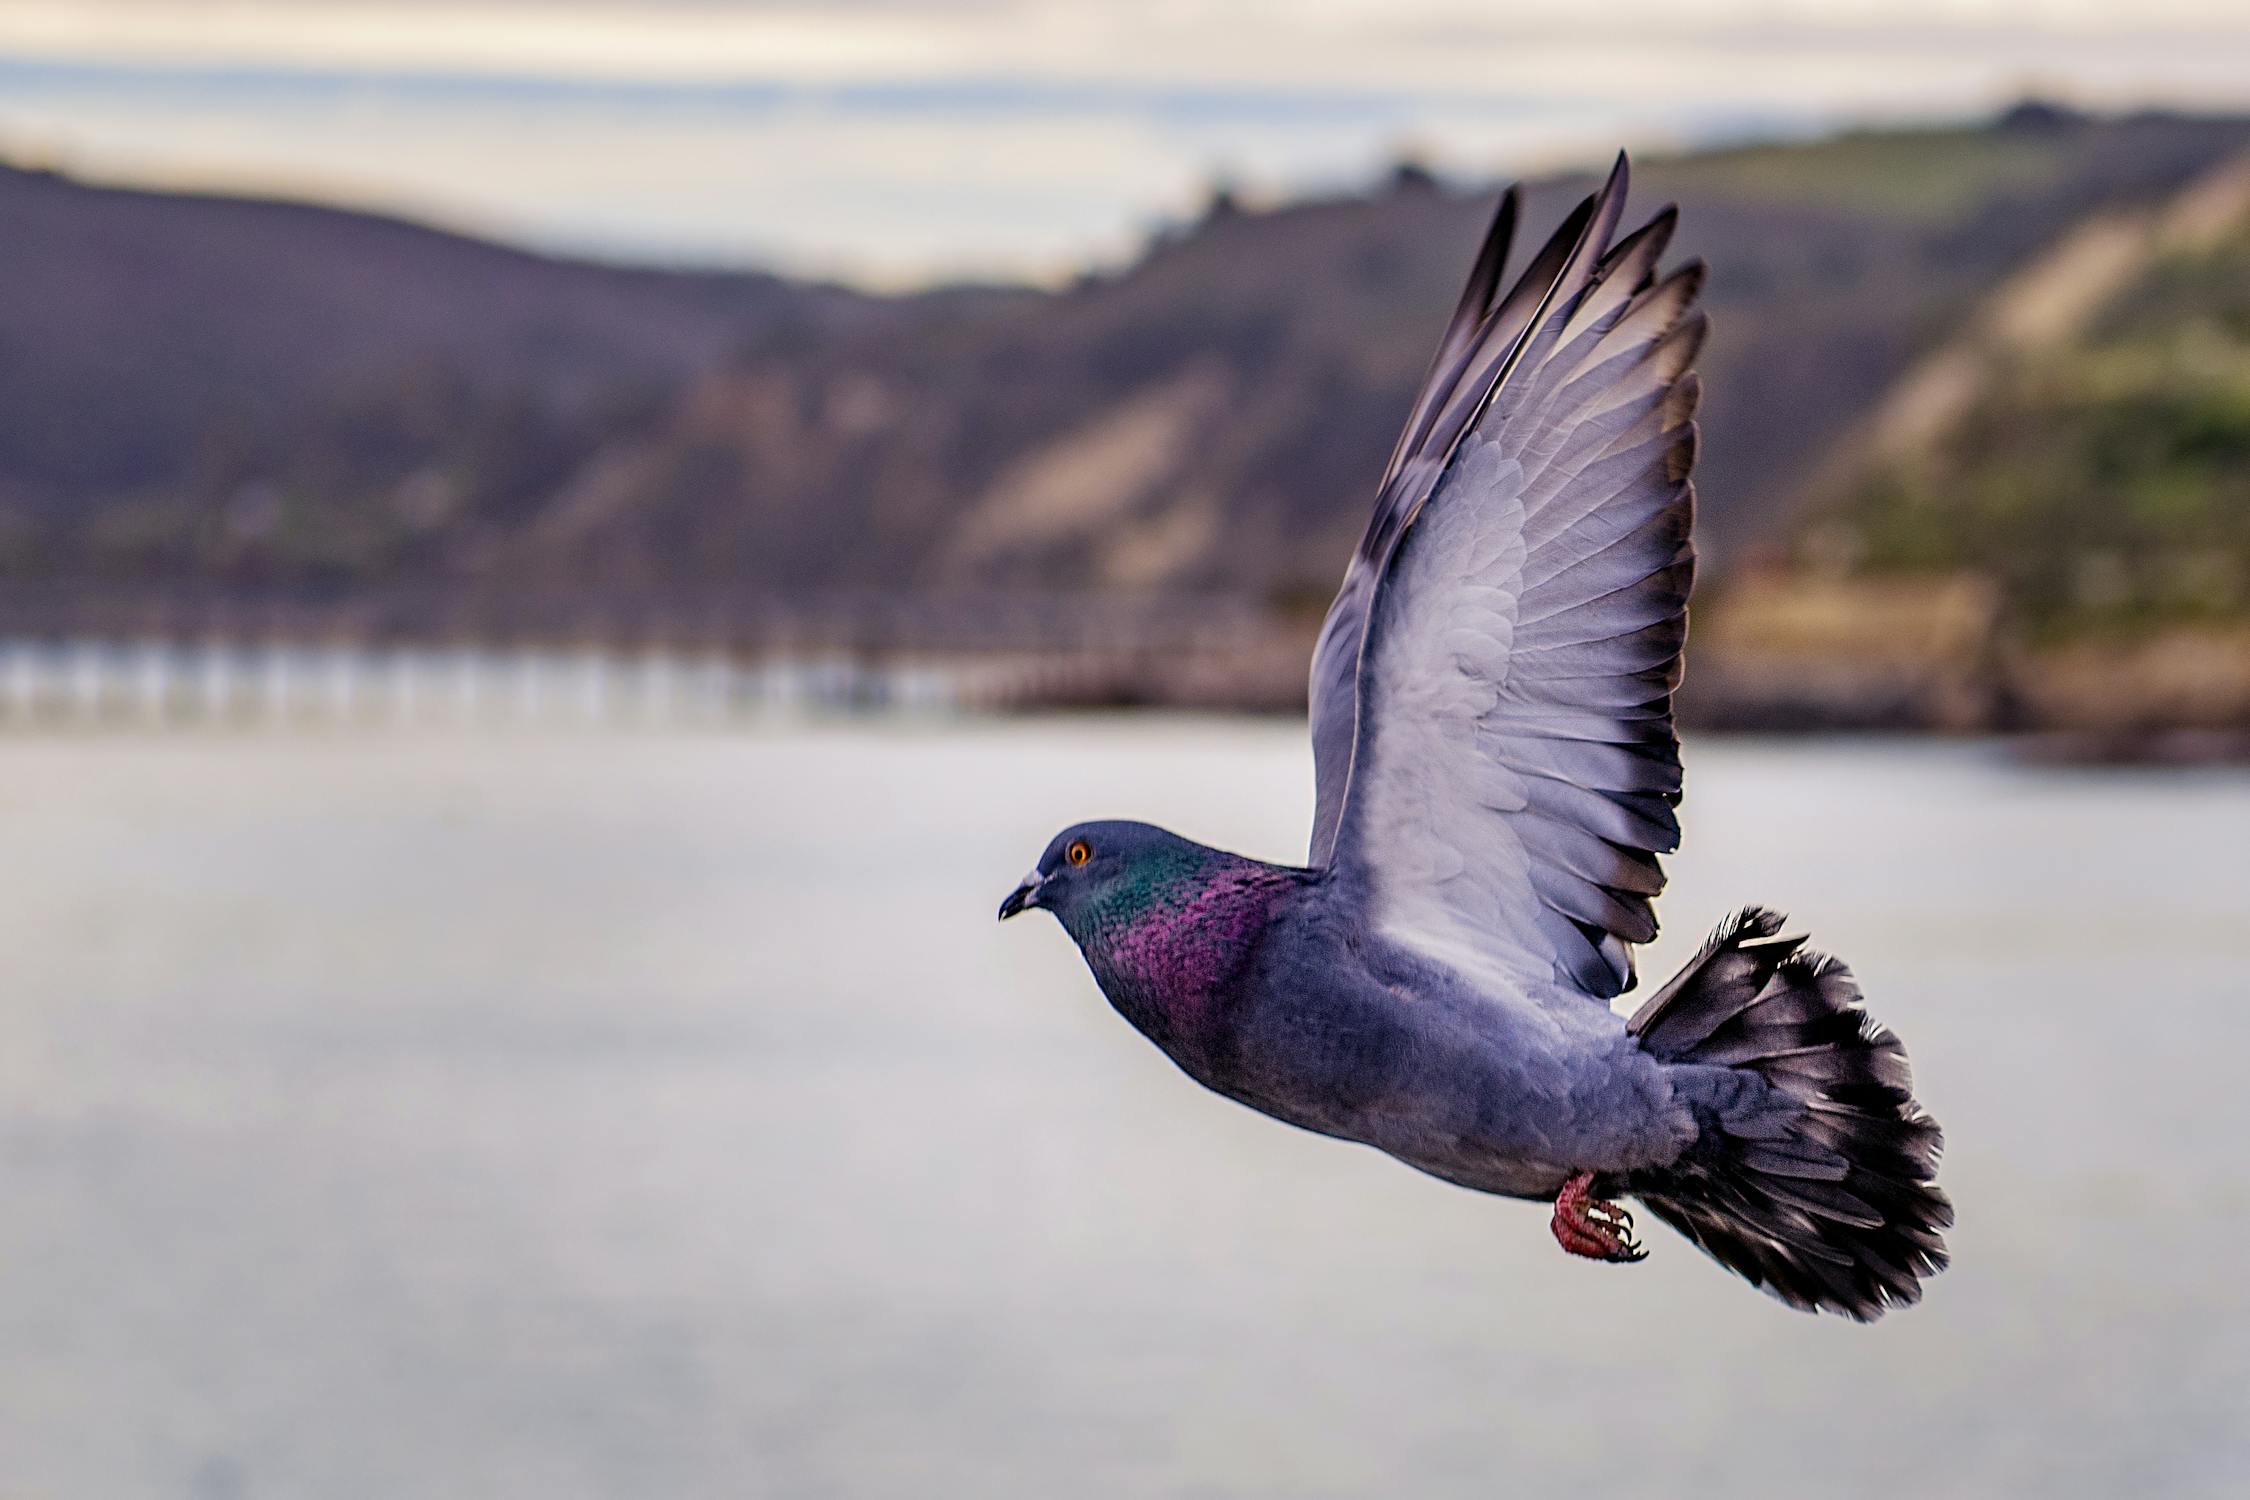 Pigeon Photo by Tim Mossholder from Pexels